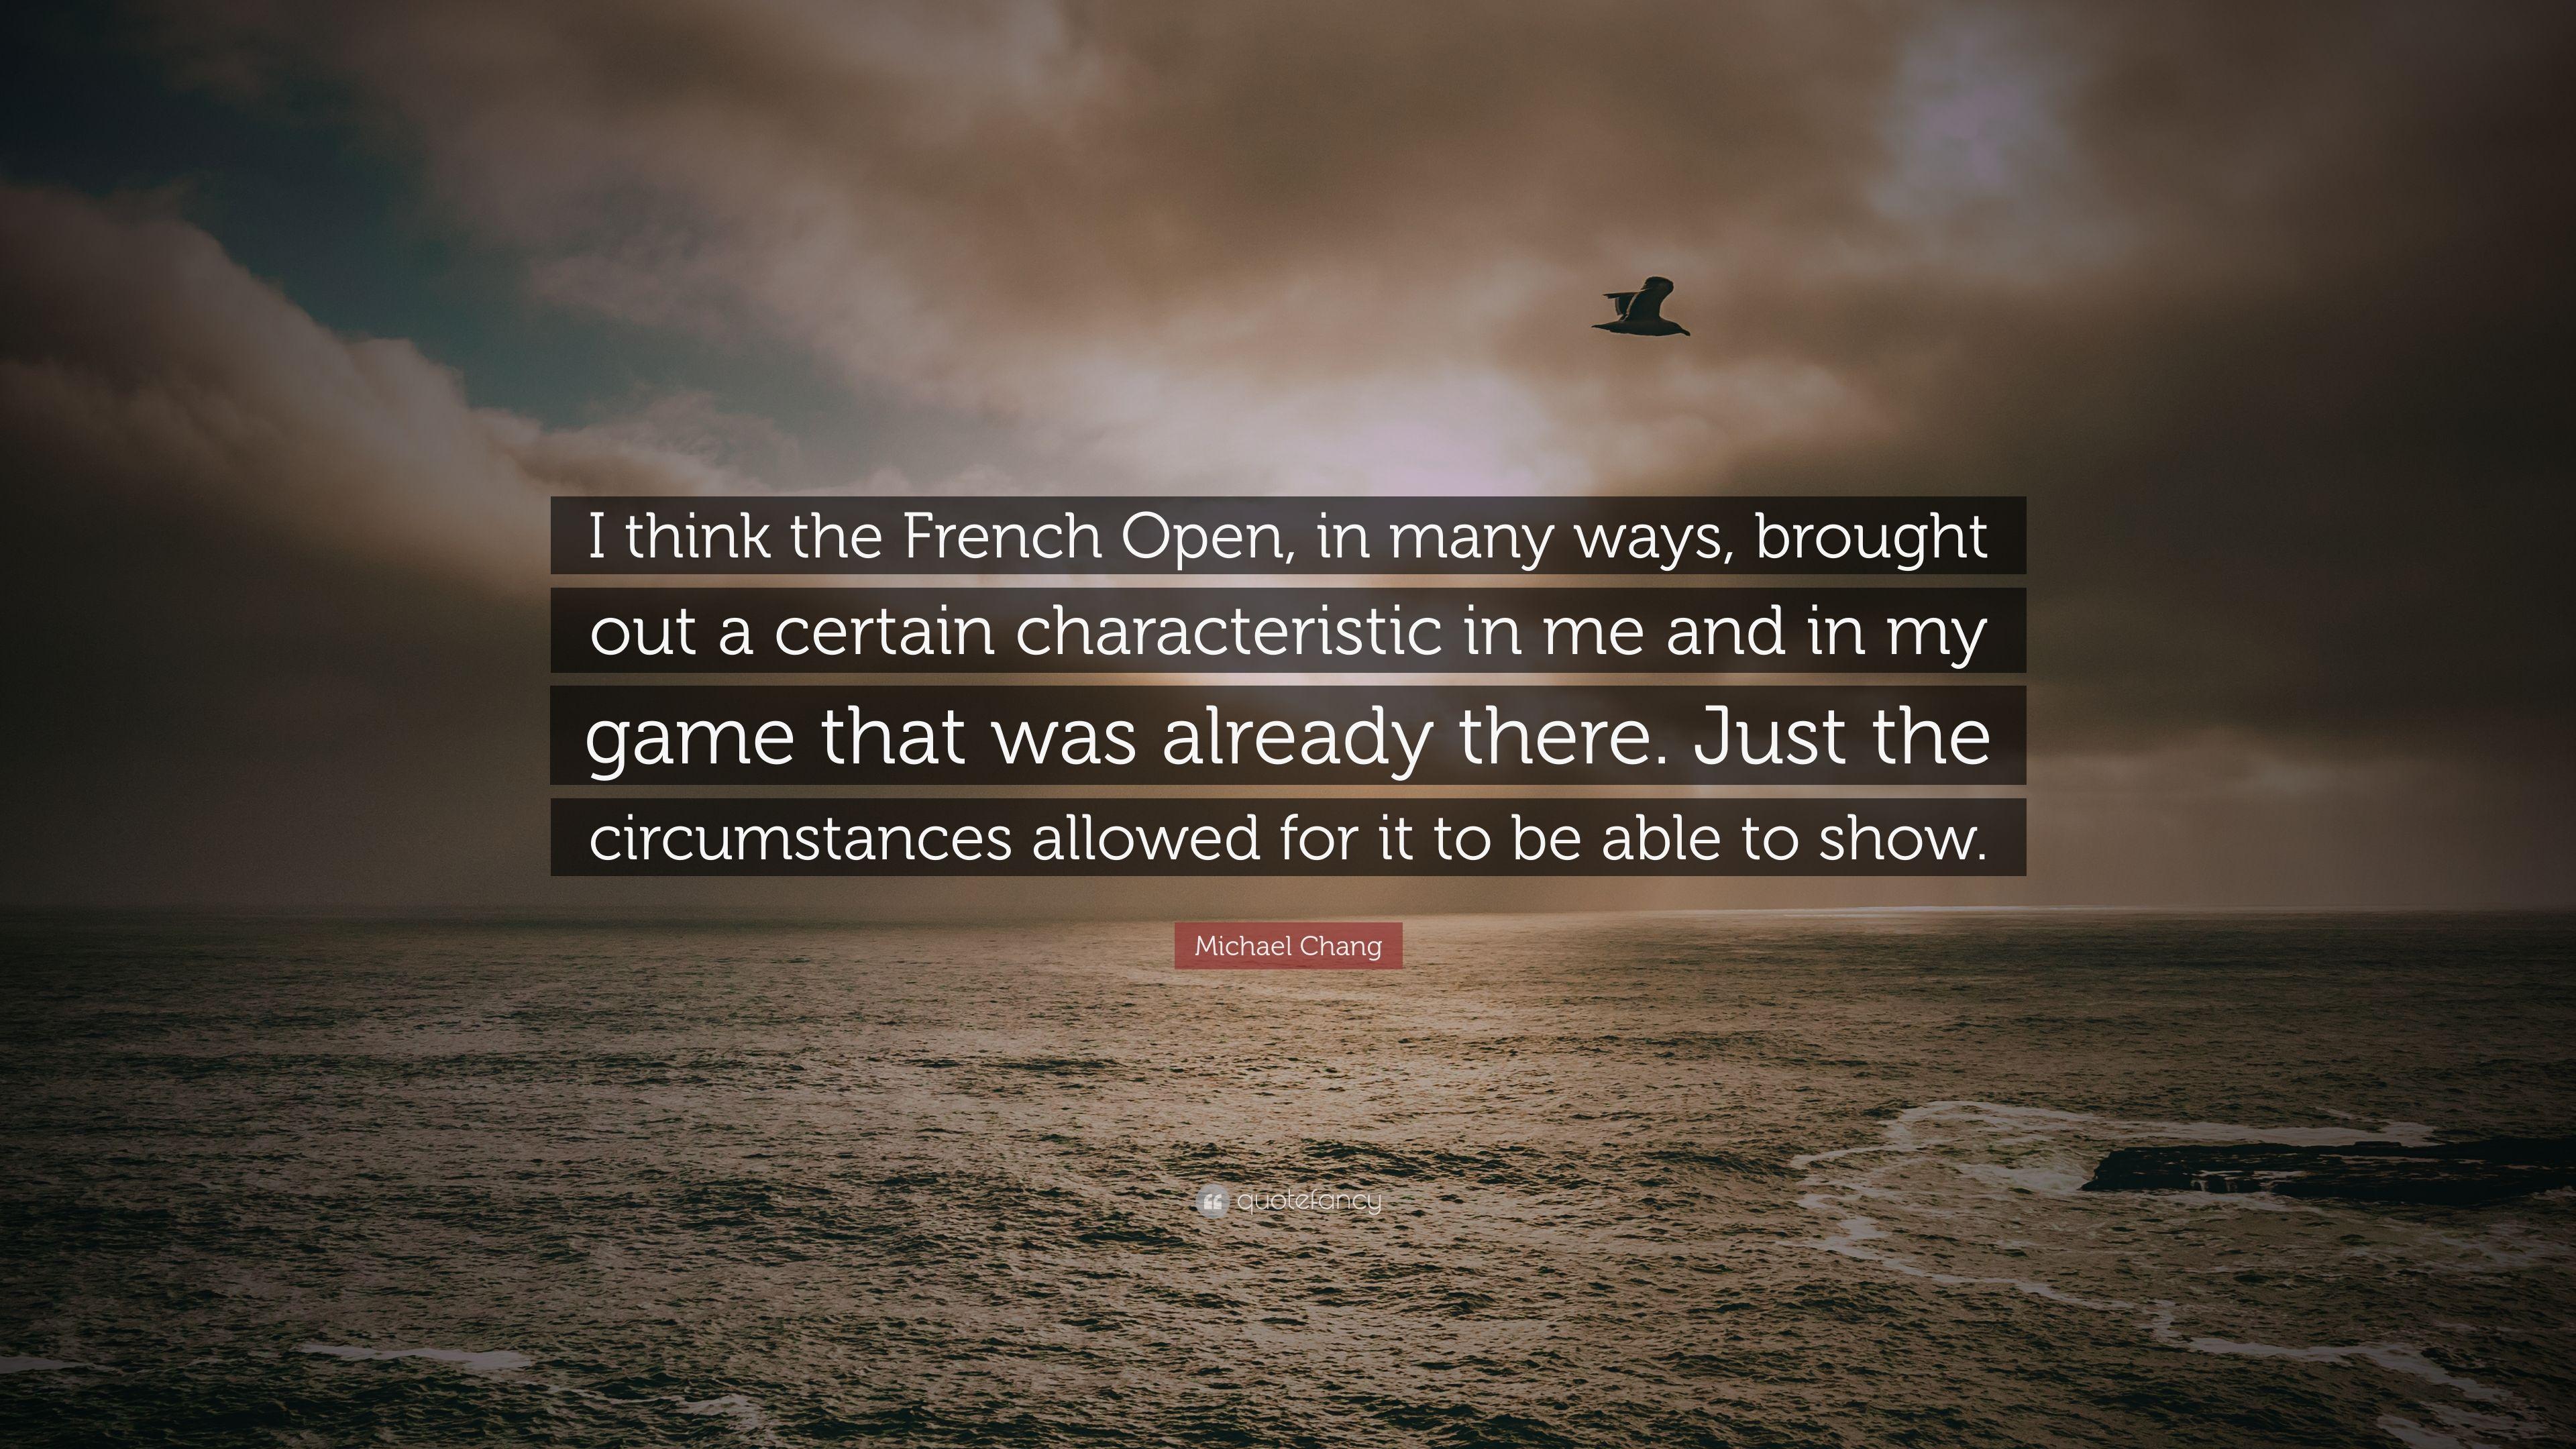 Michael Chang Quote: “I think the French Open, in many ways, brought